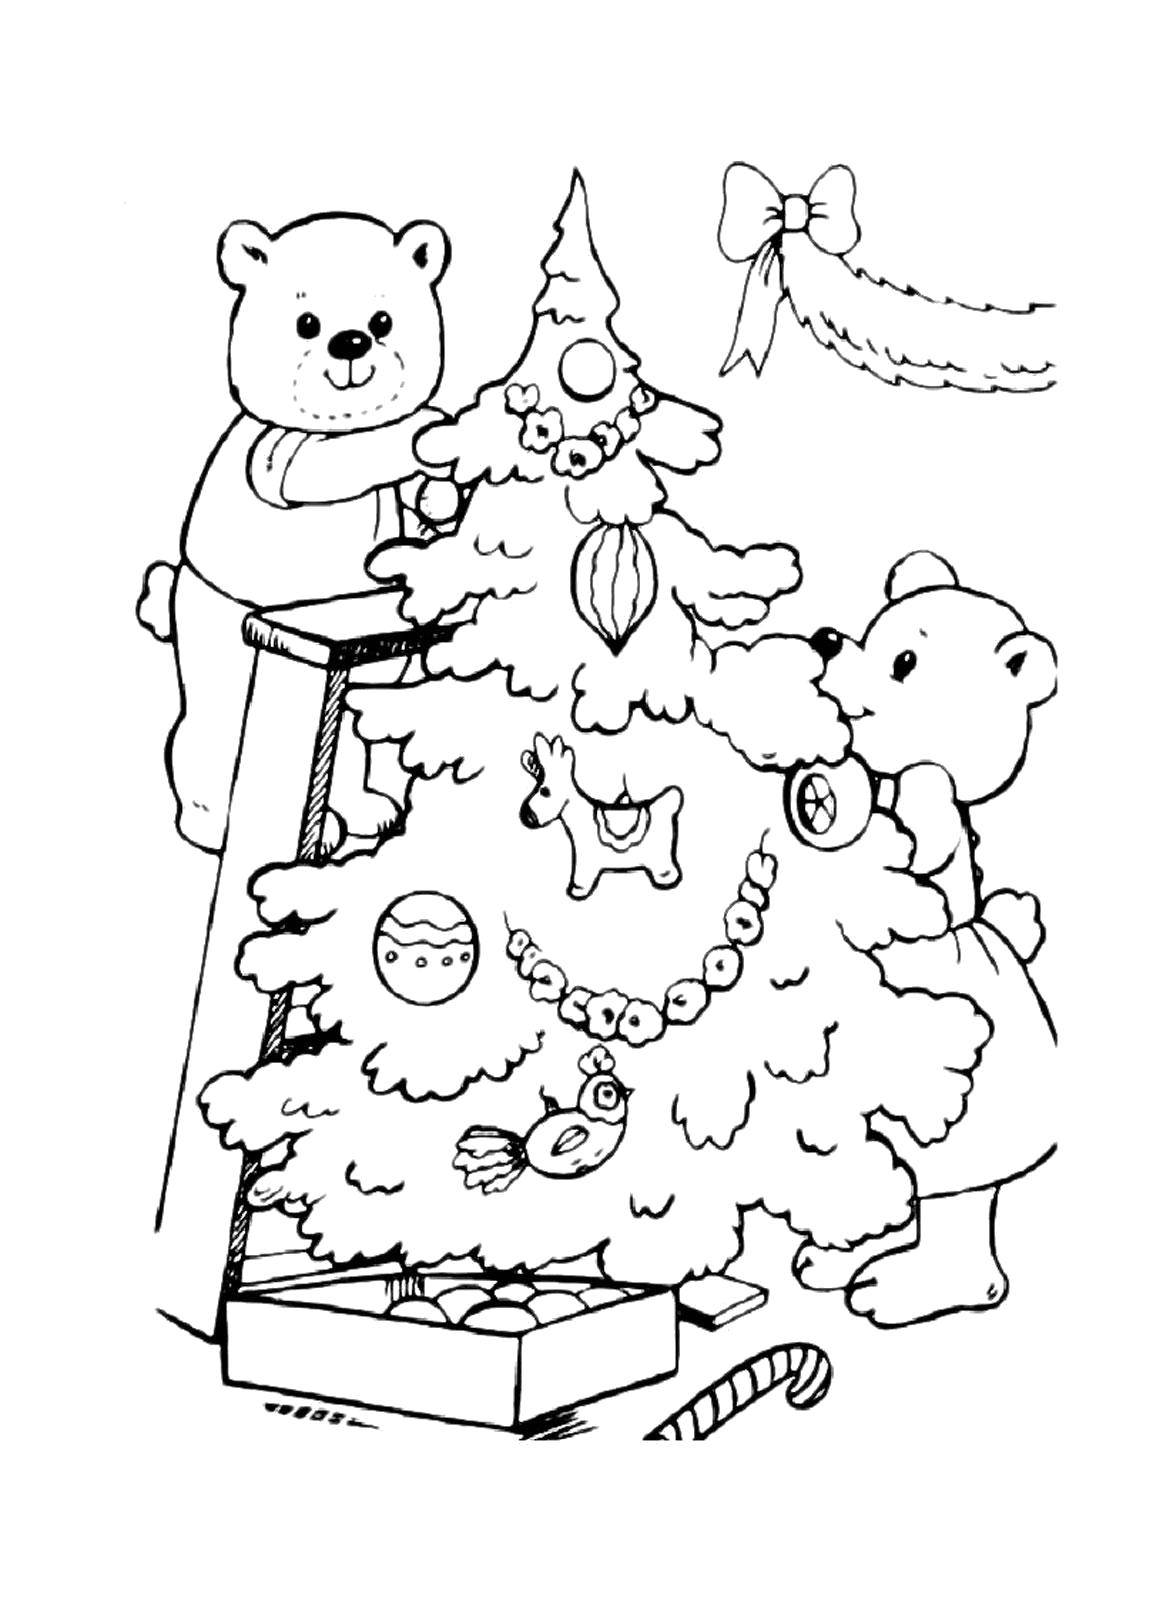 Coloring The cubs are preparing for the new year. Category coloring Christmas tree. Tags:  New Year, tree, gifts, toys.